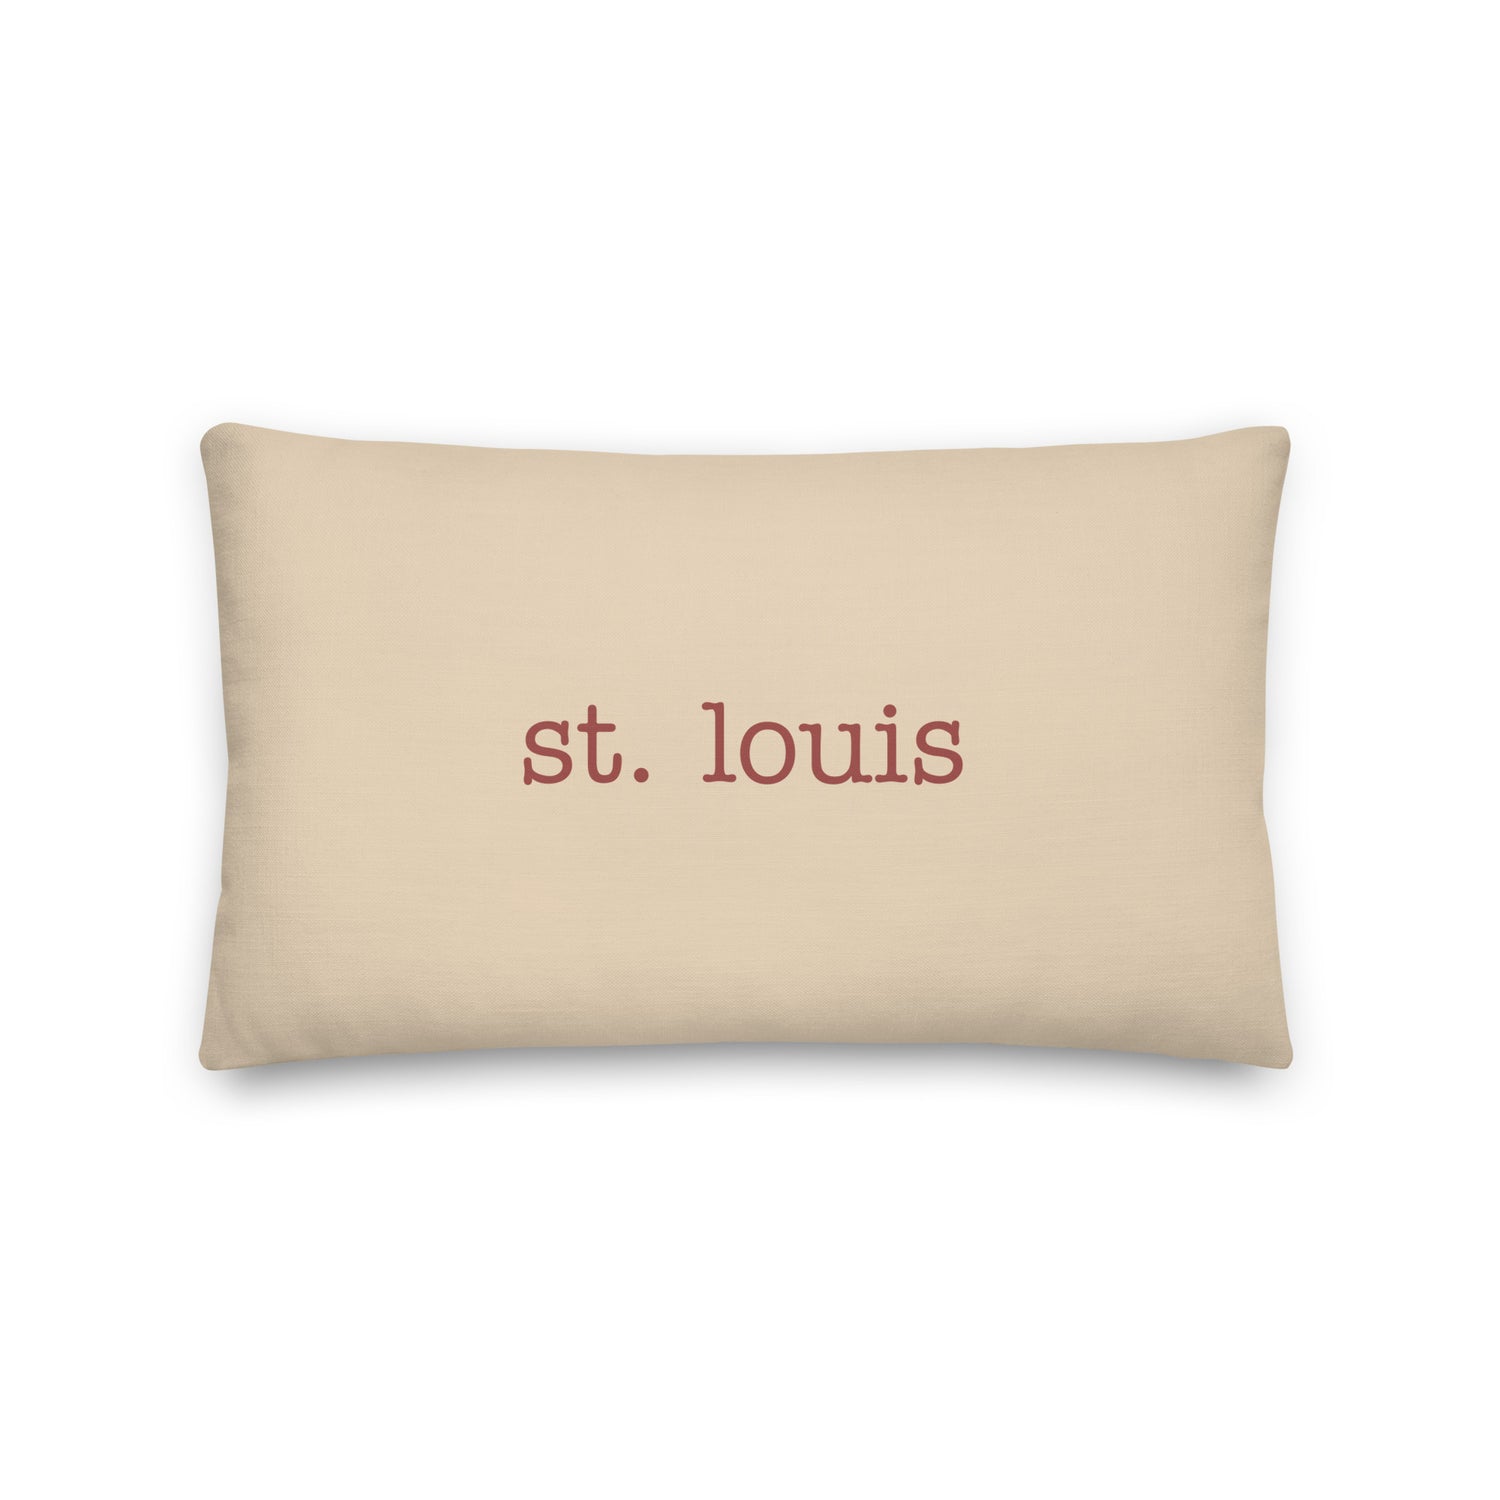 St. Louis Missouri Pillows and Blankets • STL Airport Code